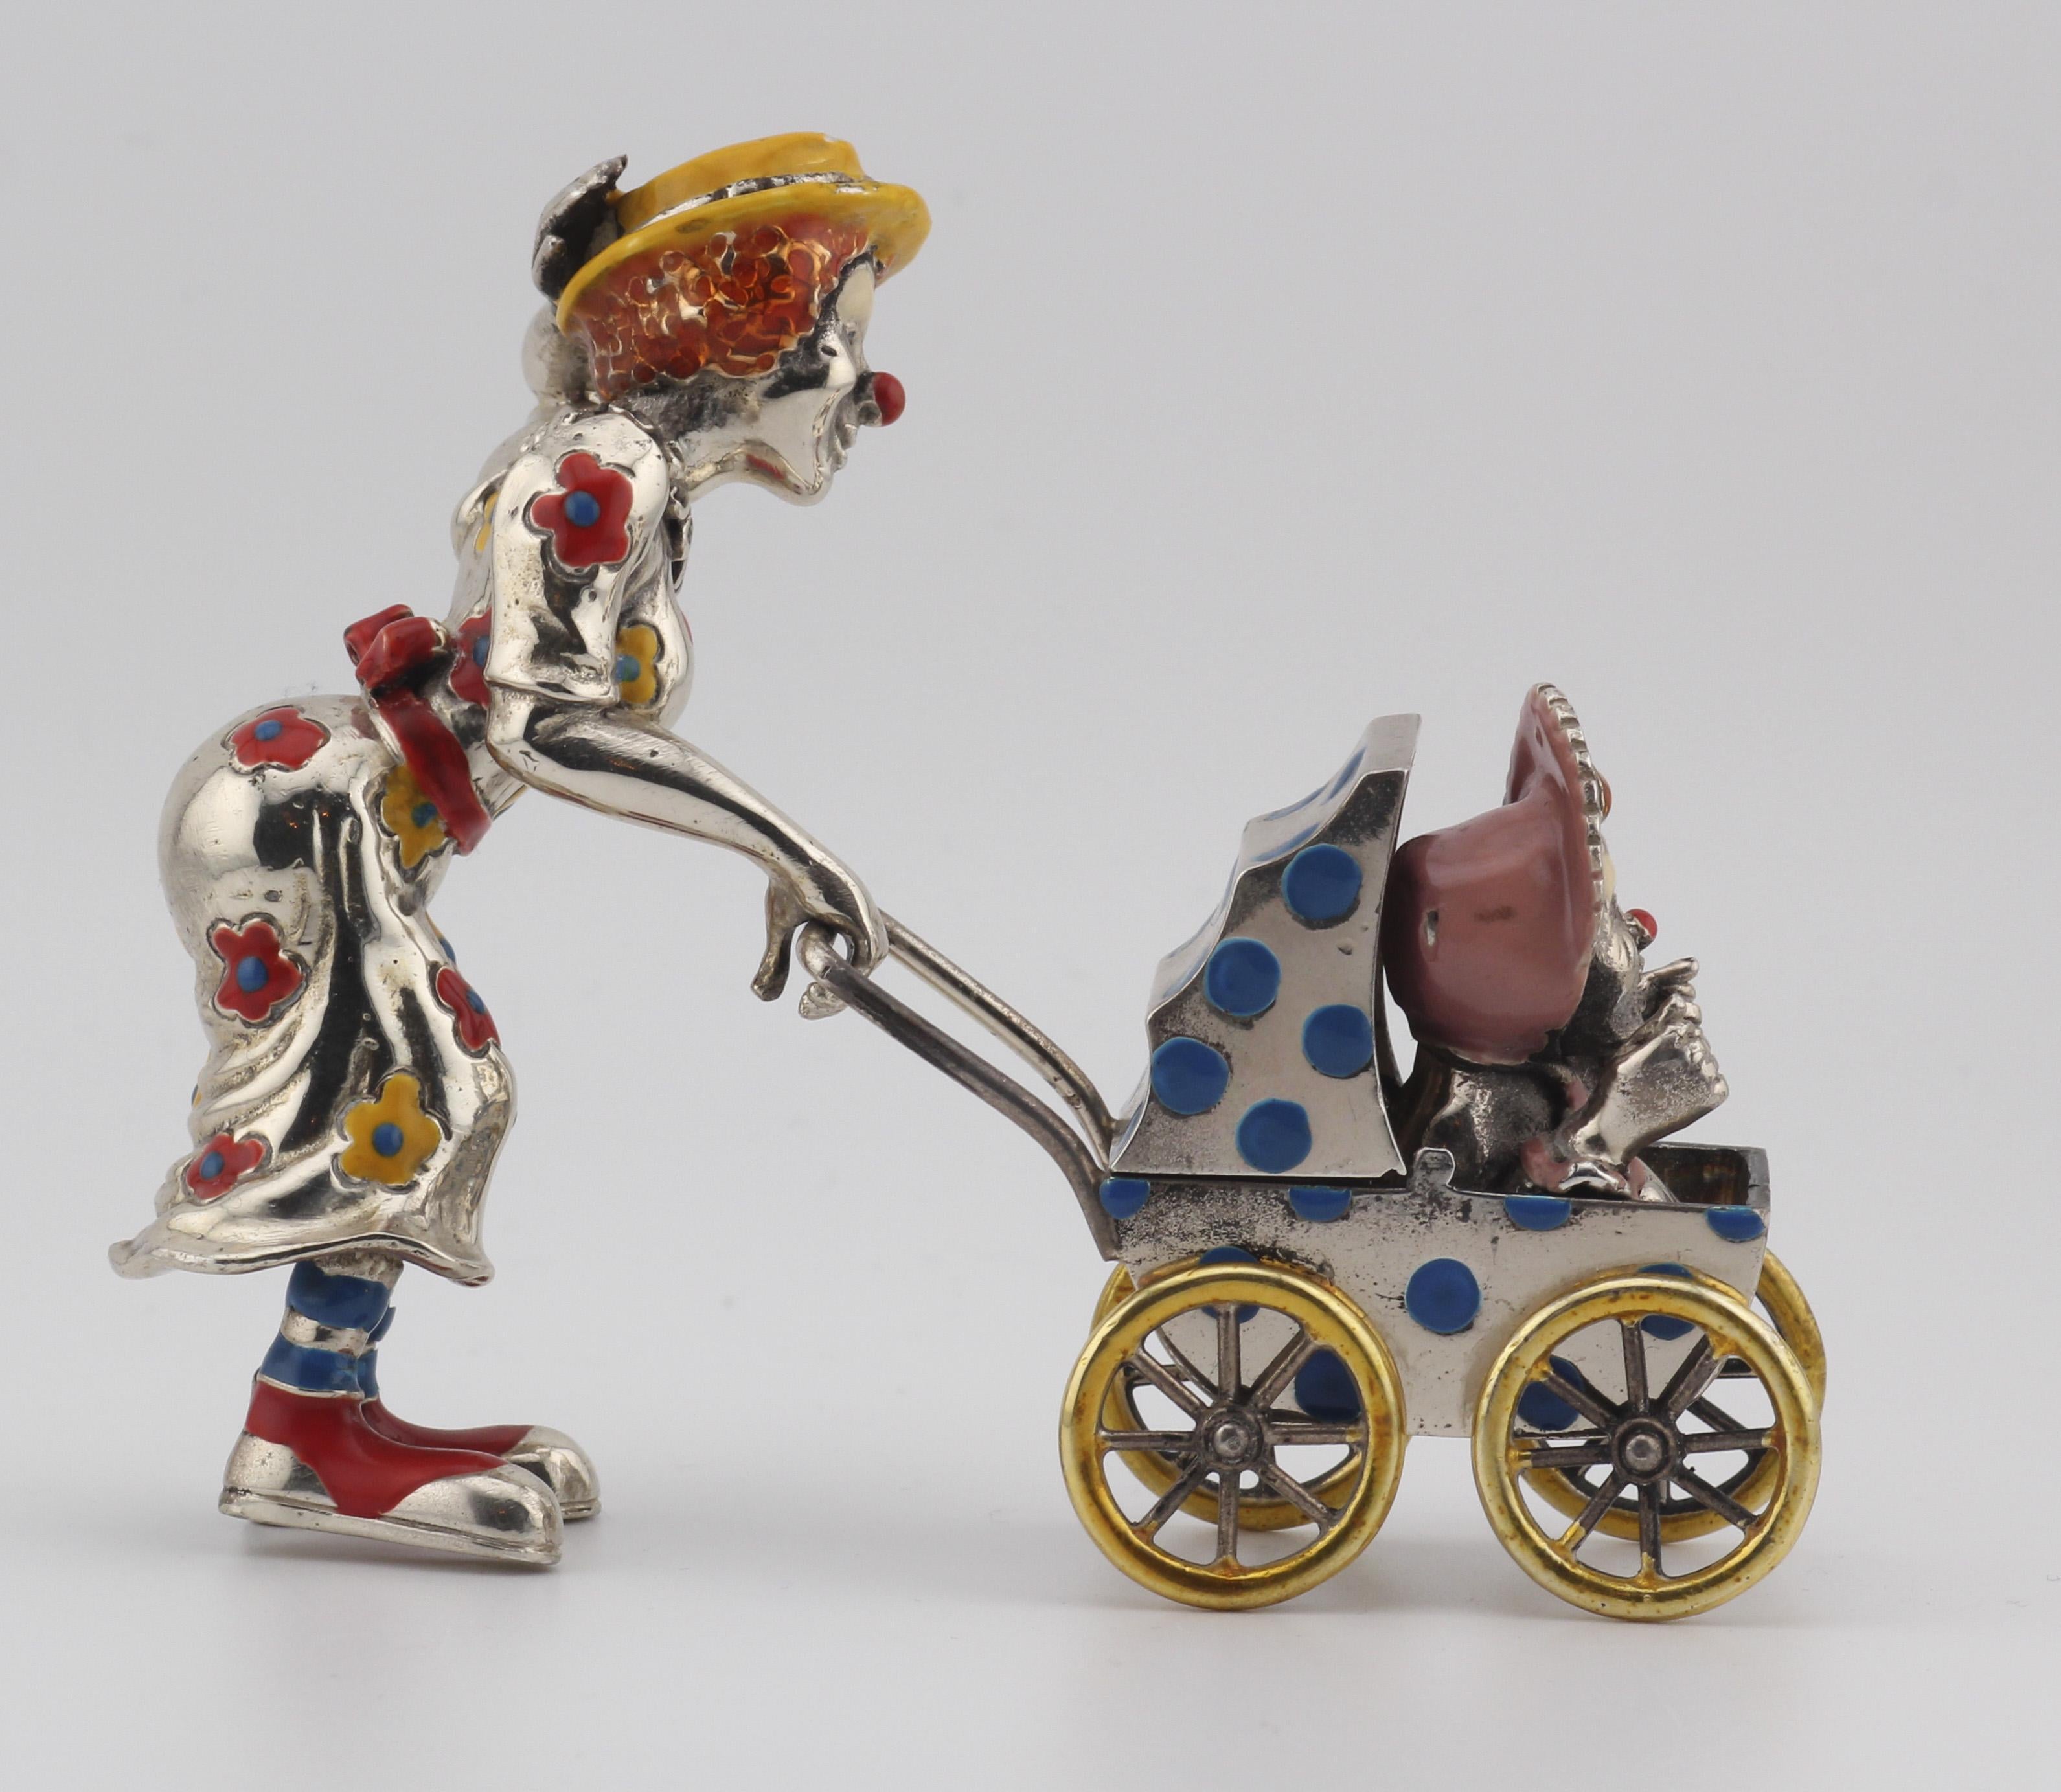 Tiffany & Co.  Silver Enamel Circus Clown Mother w/ Baby in Carriage Figurine In Good Condition For Sale In Bellmore, NY